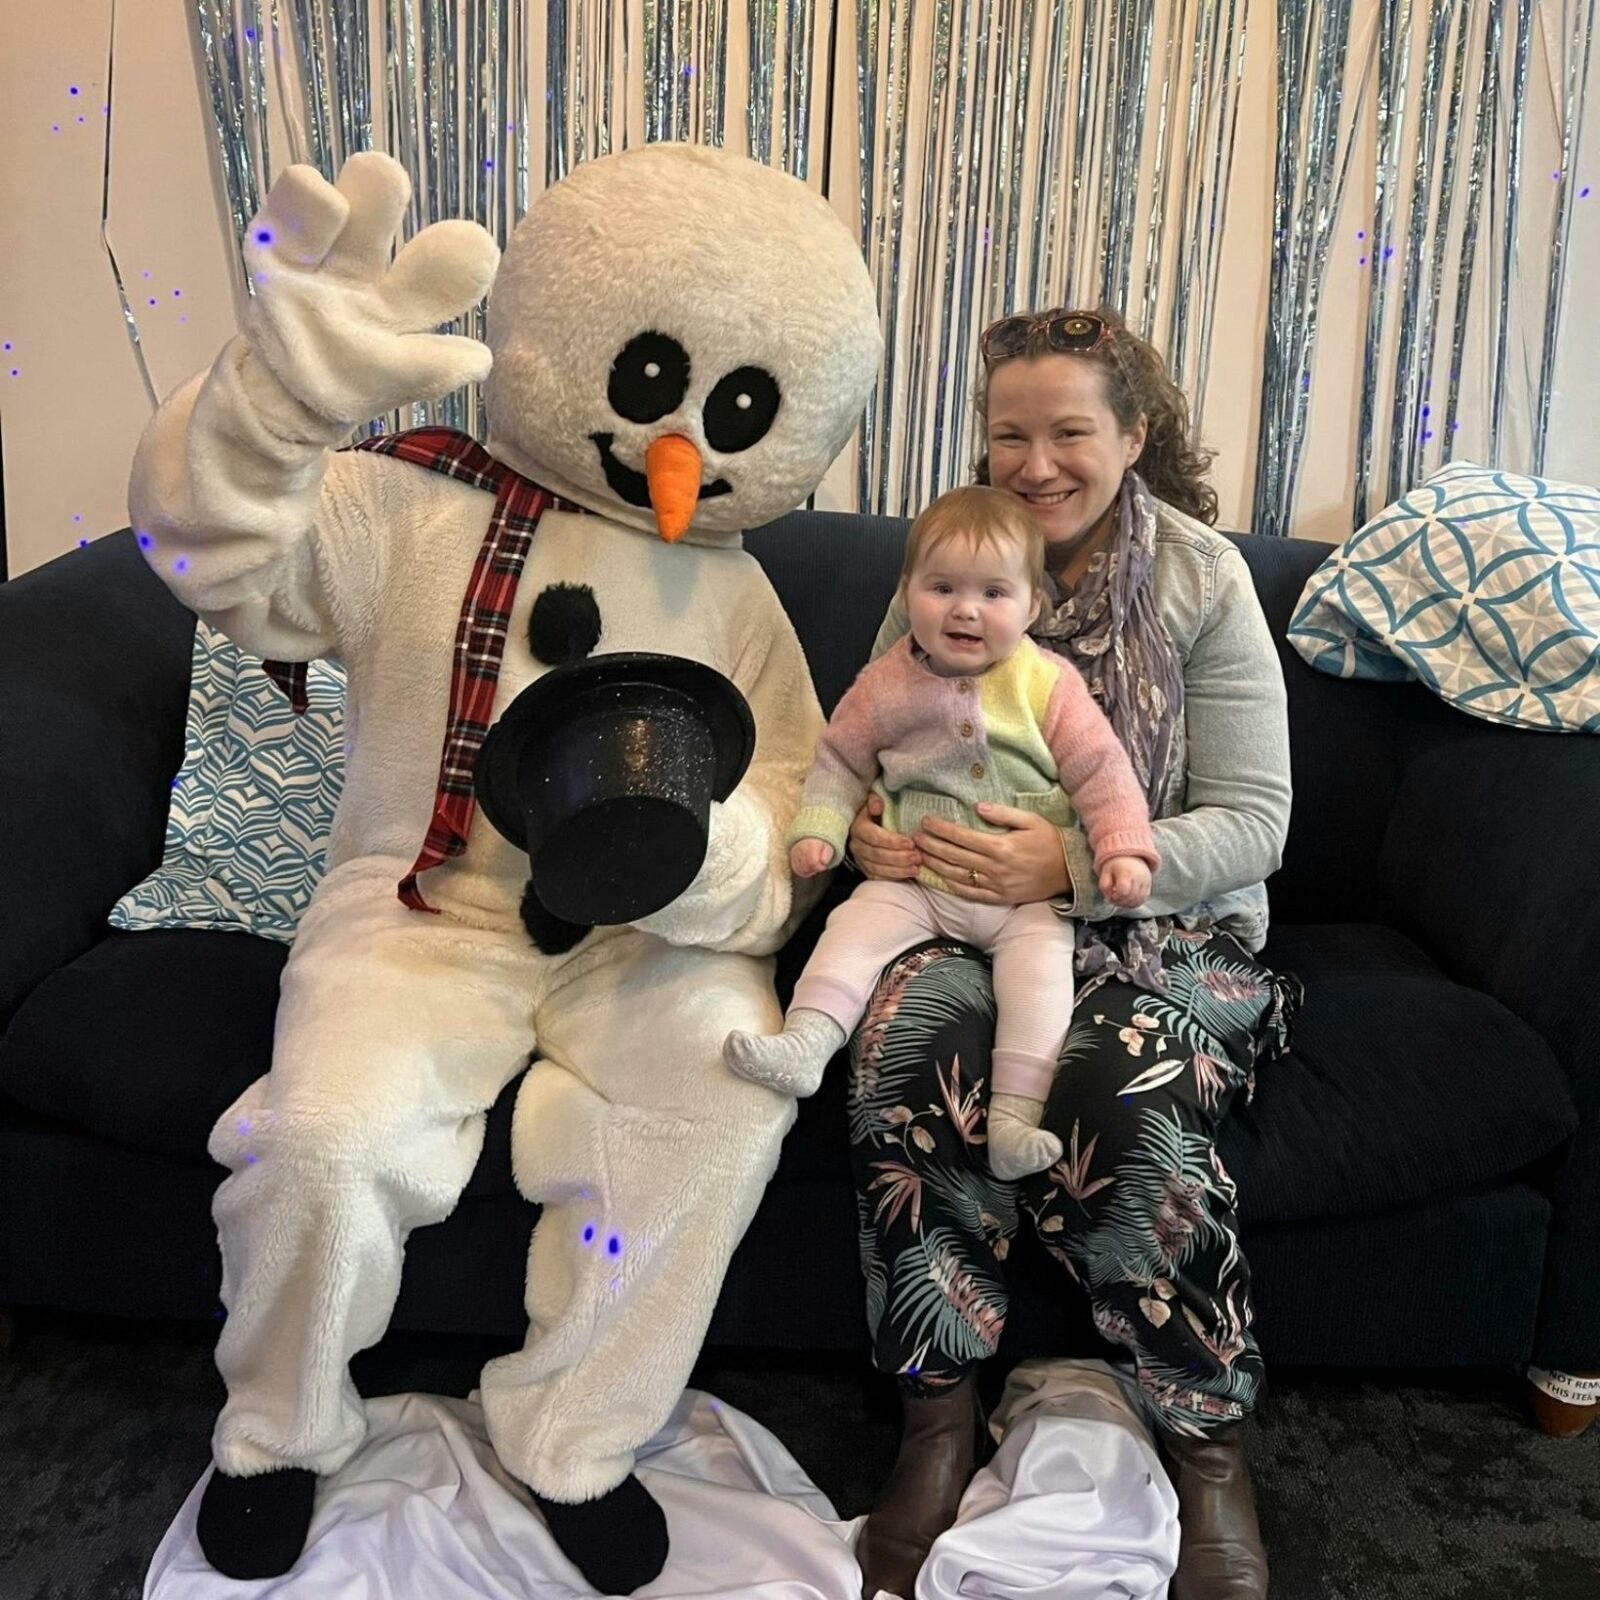 Frosty the Snowman poses on a couch with a mother and baby for a photo